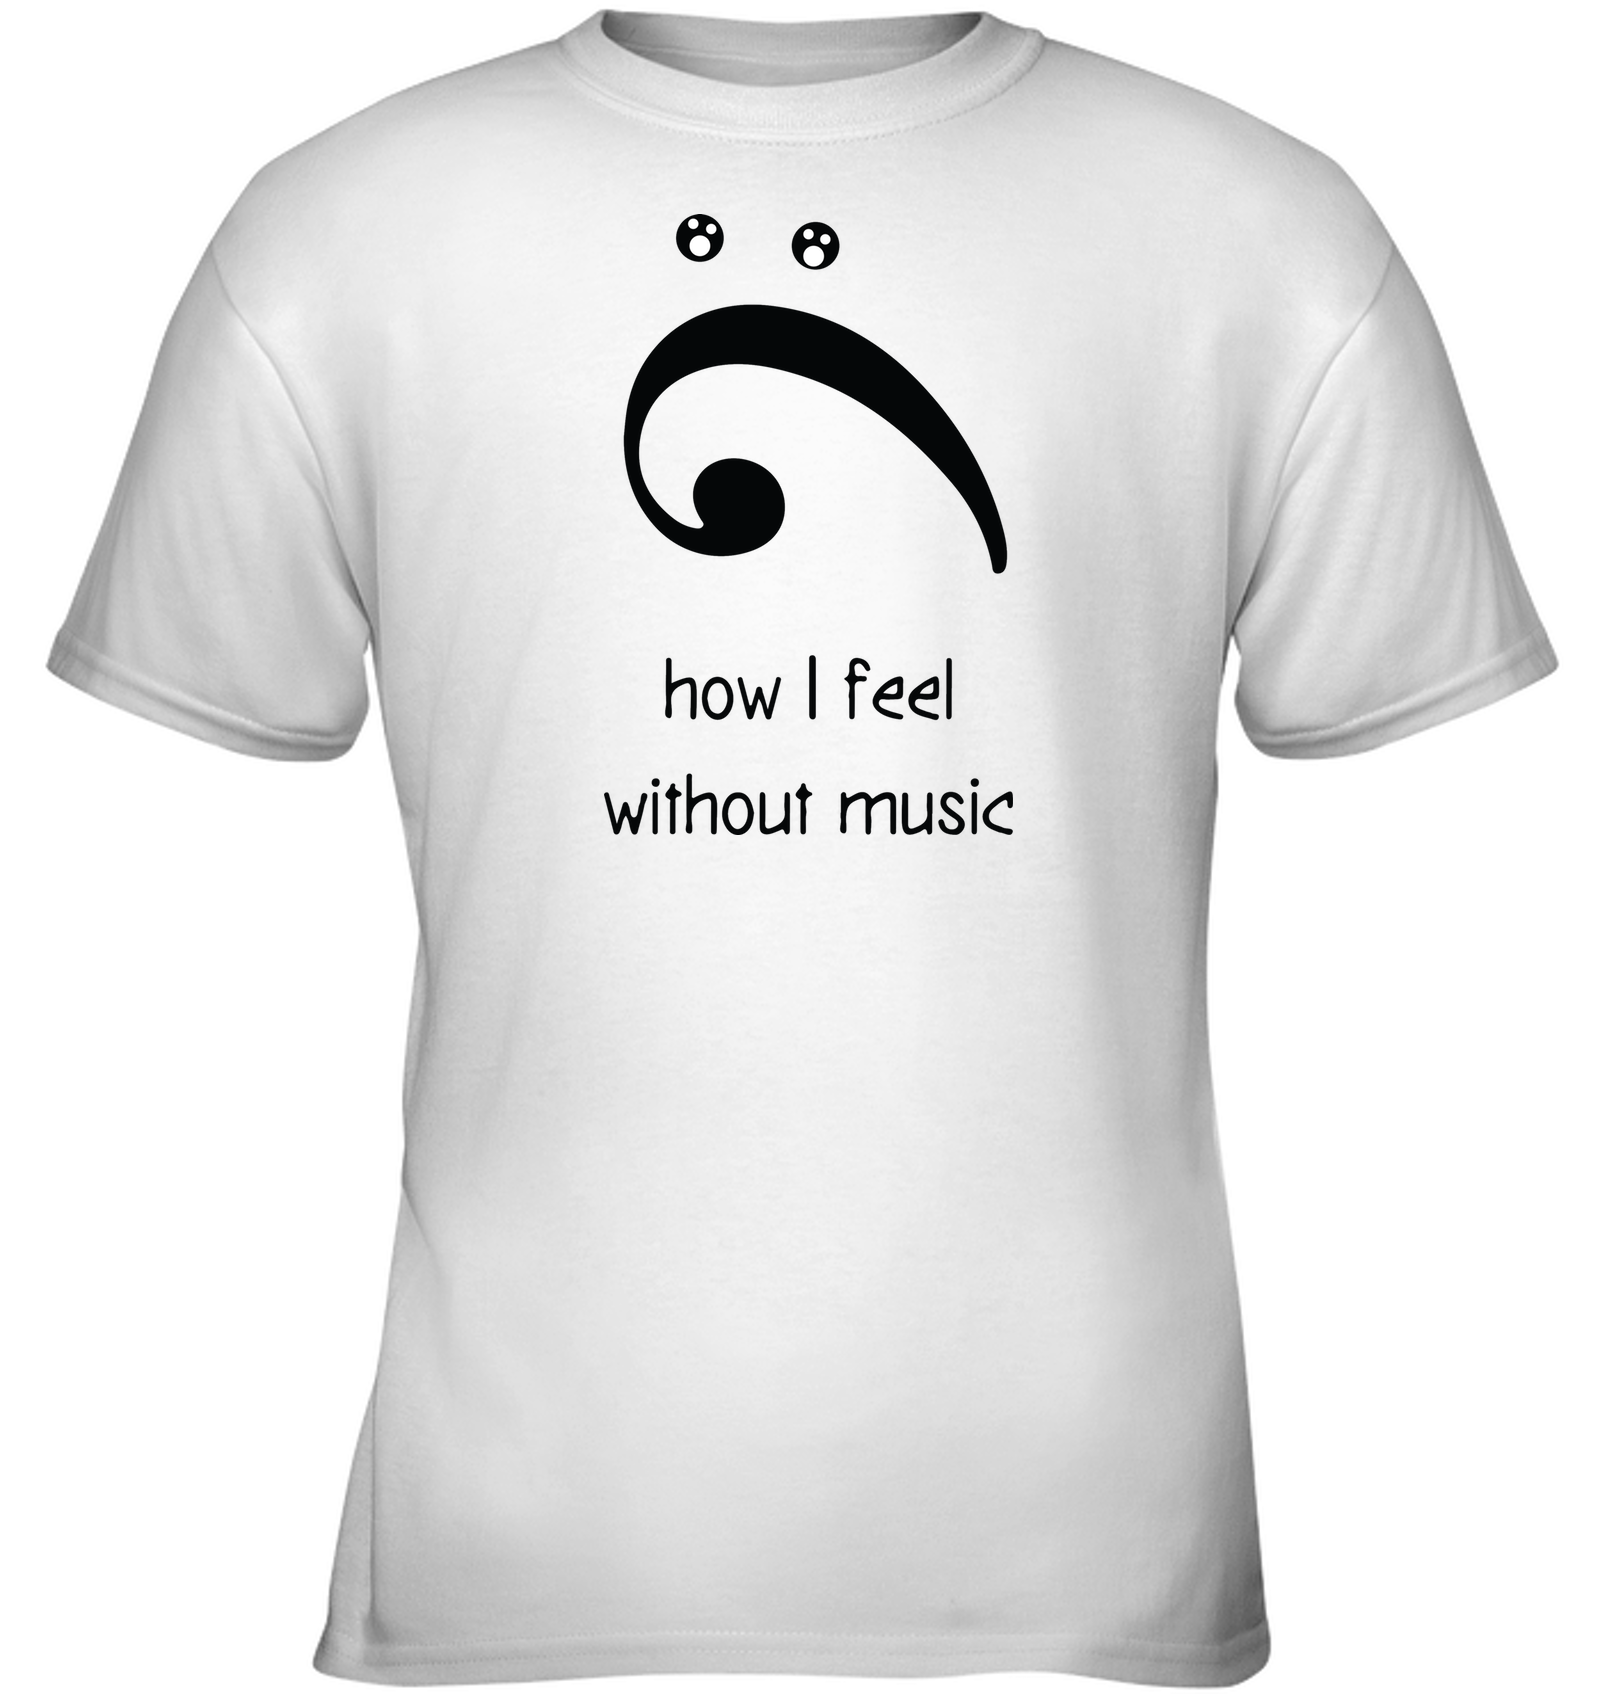 How I Feel Without Music - Gildan Youth Short Sleeve T-Shirt